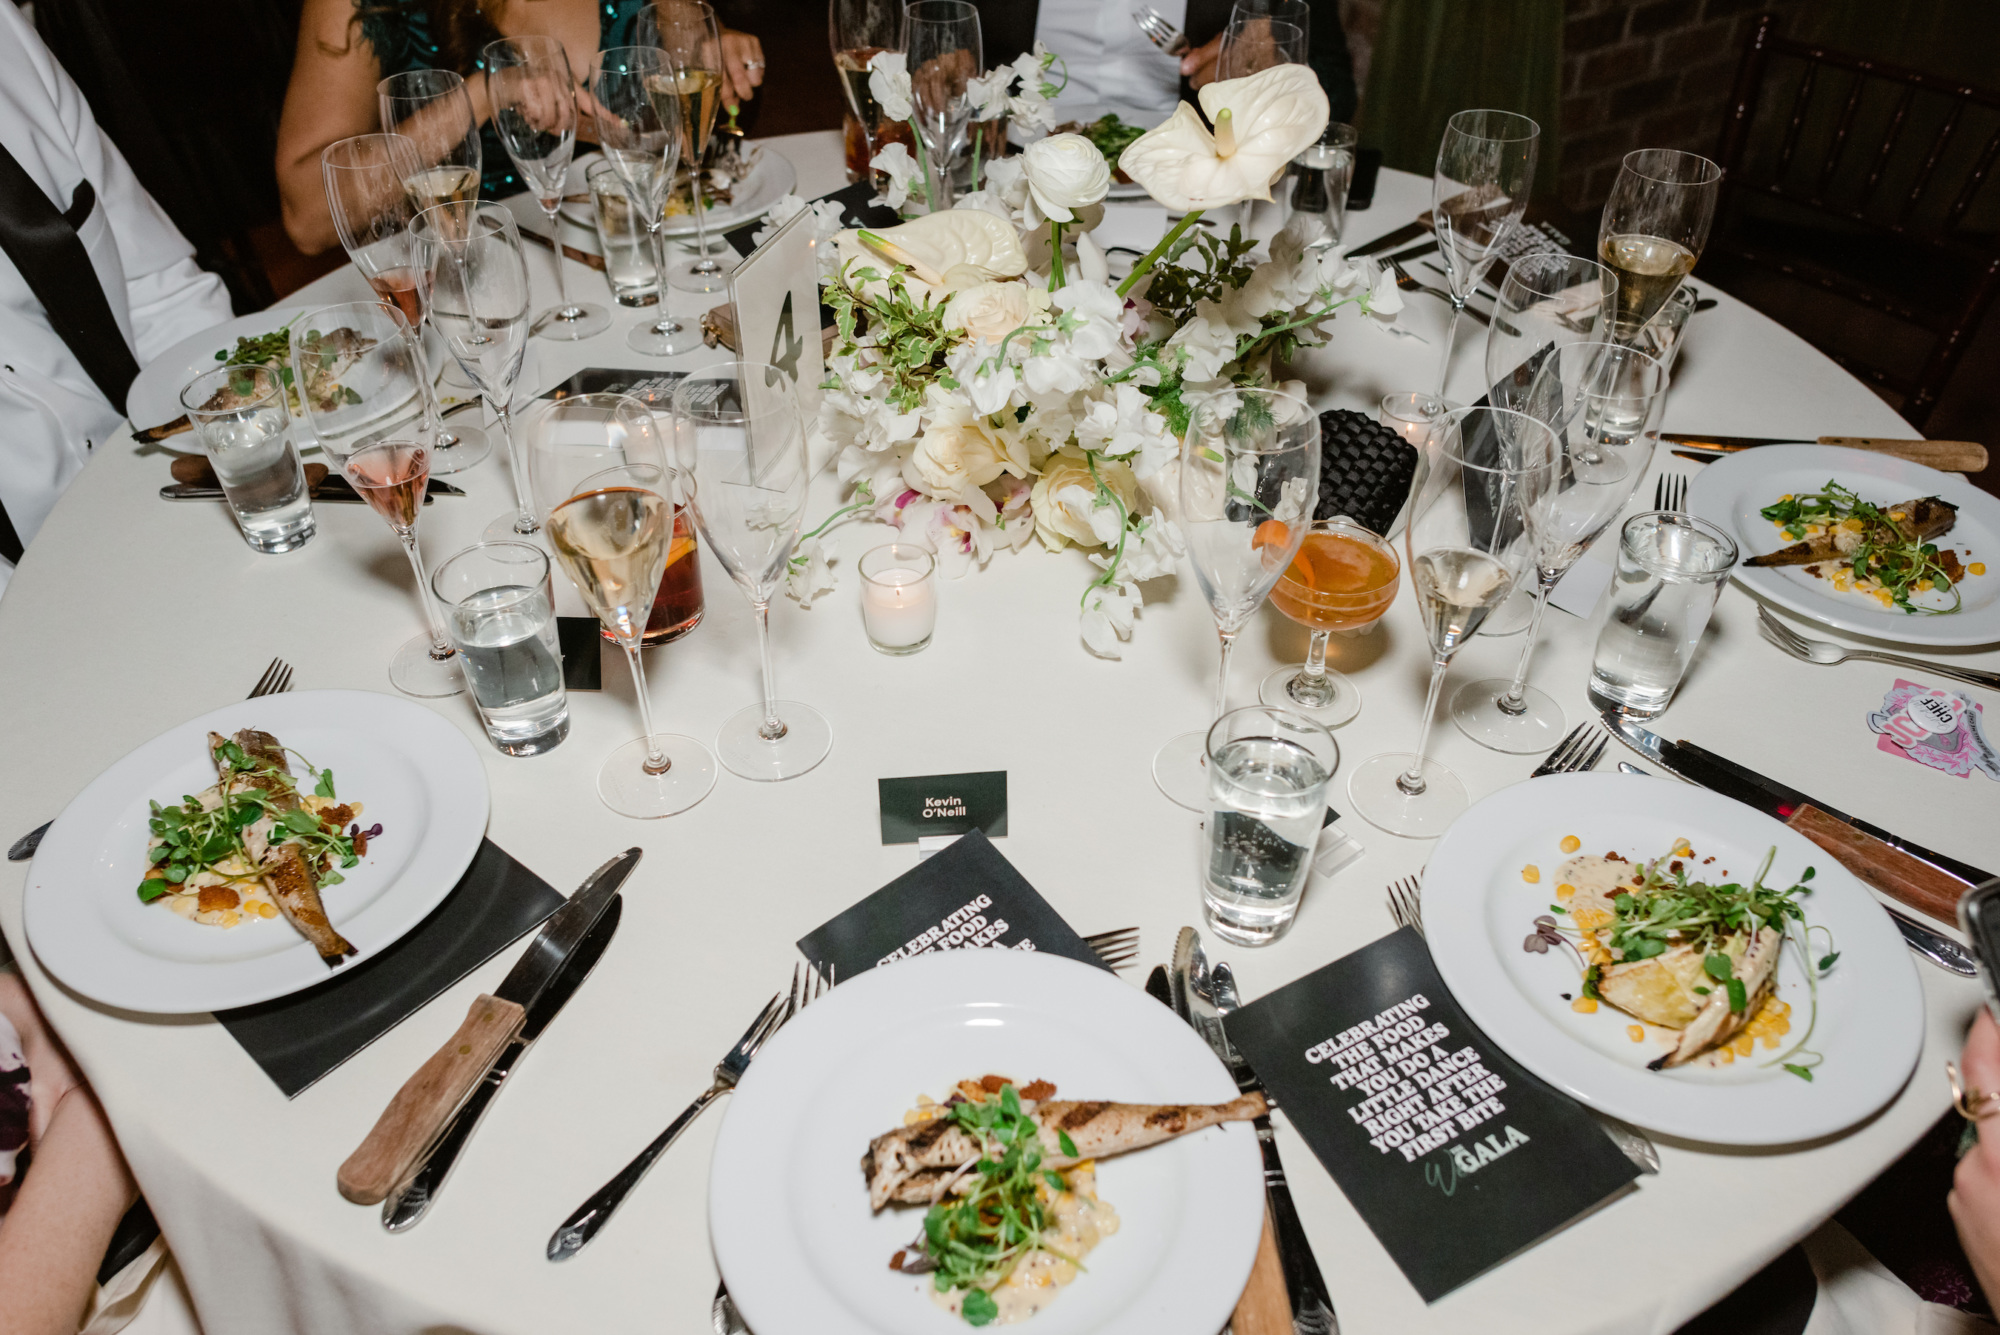 The inaugural WE Gala, held on May 17 in New York, was a celebration of Black excellence in the hospitality industry, and featured a multi-course meal celebrating Black Luxury, from Honeysuckle Projects chefs Cybille St. Aude-Tate and Omar Tate.